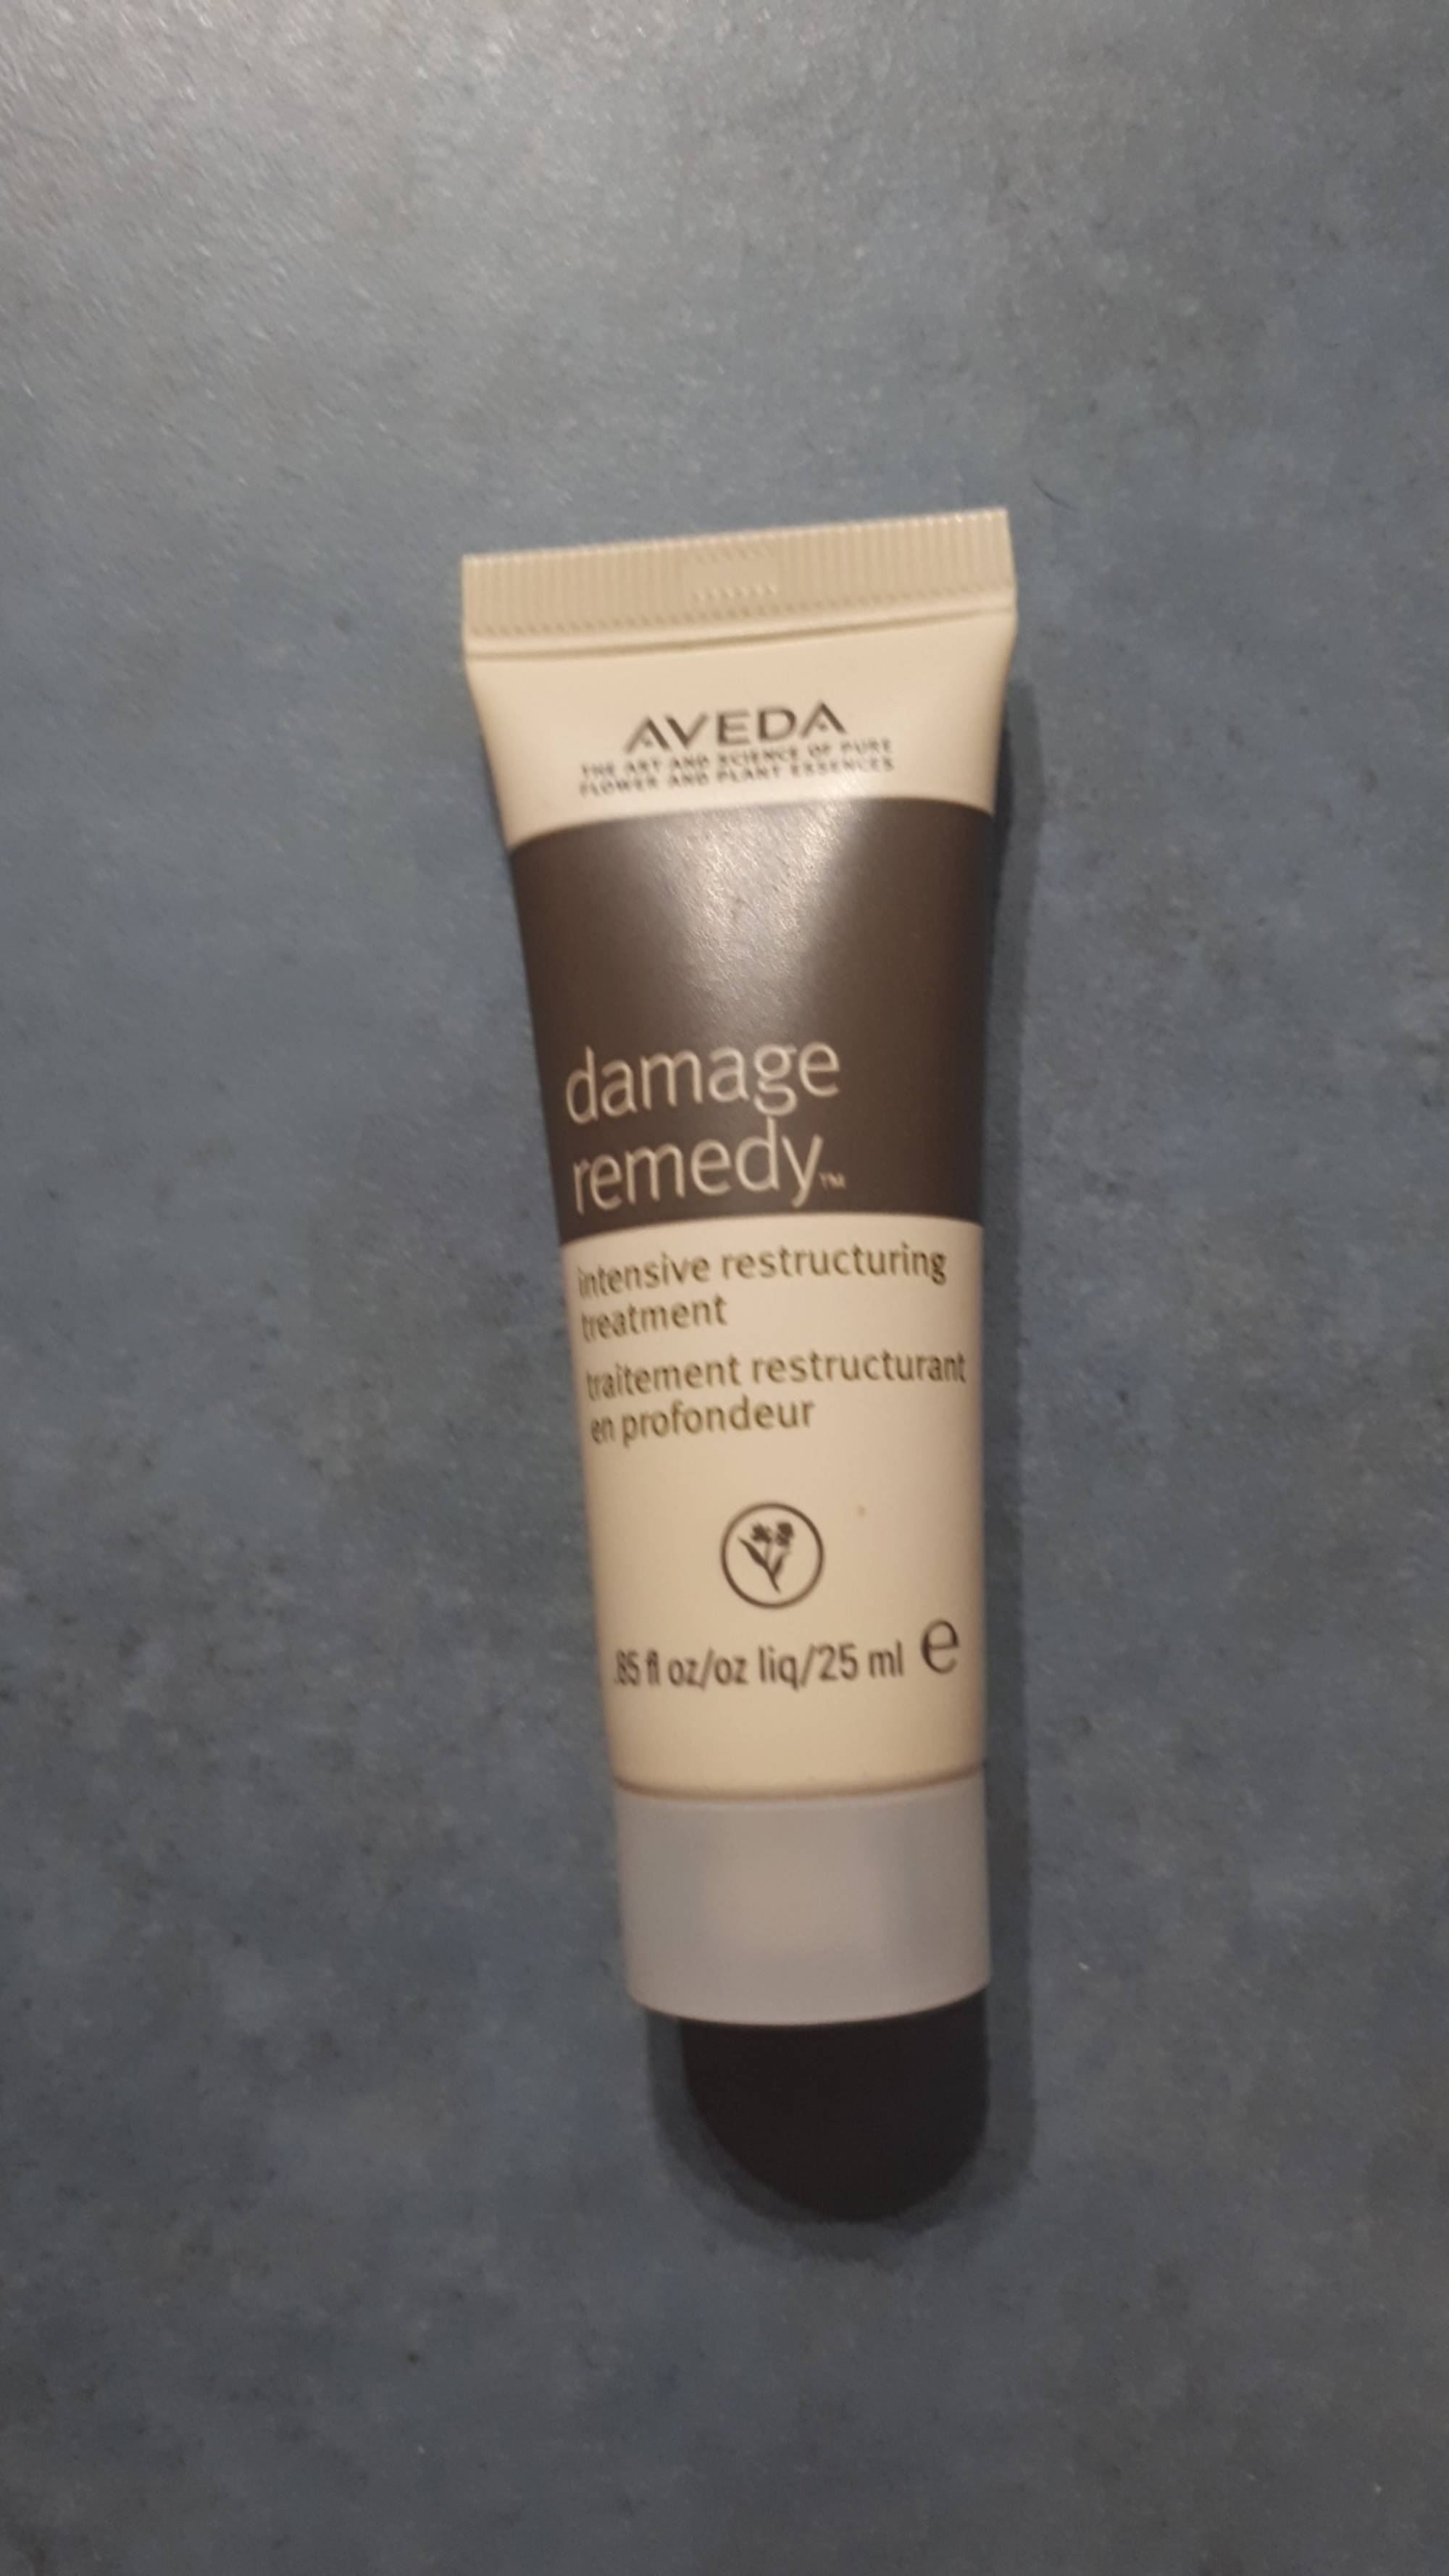 AVEDA - Damage remedy - After shampooing